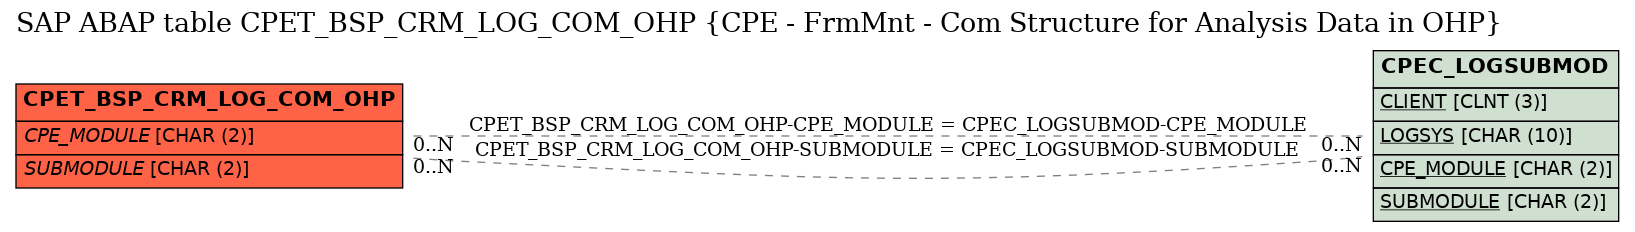 E-R Diagram for table CPET_BSP_CRM_LOG_COM_OHP (CPE - FrmMnt - Com Structure for Analysis Data in OHP)